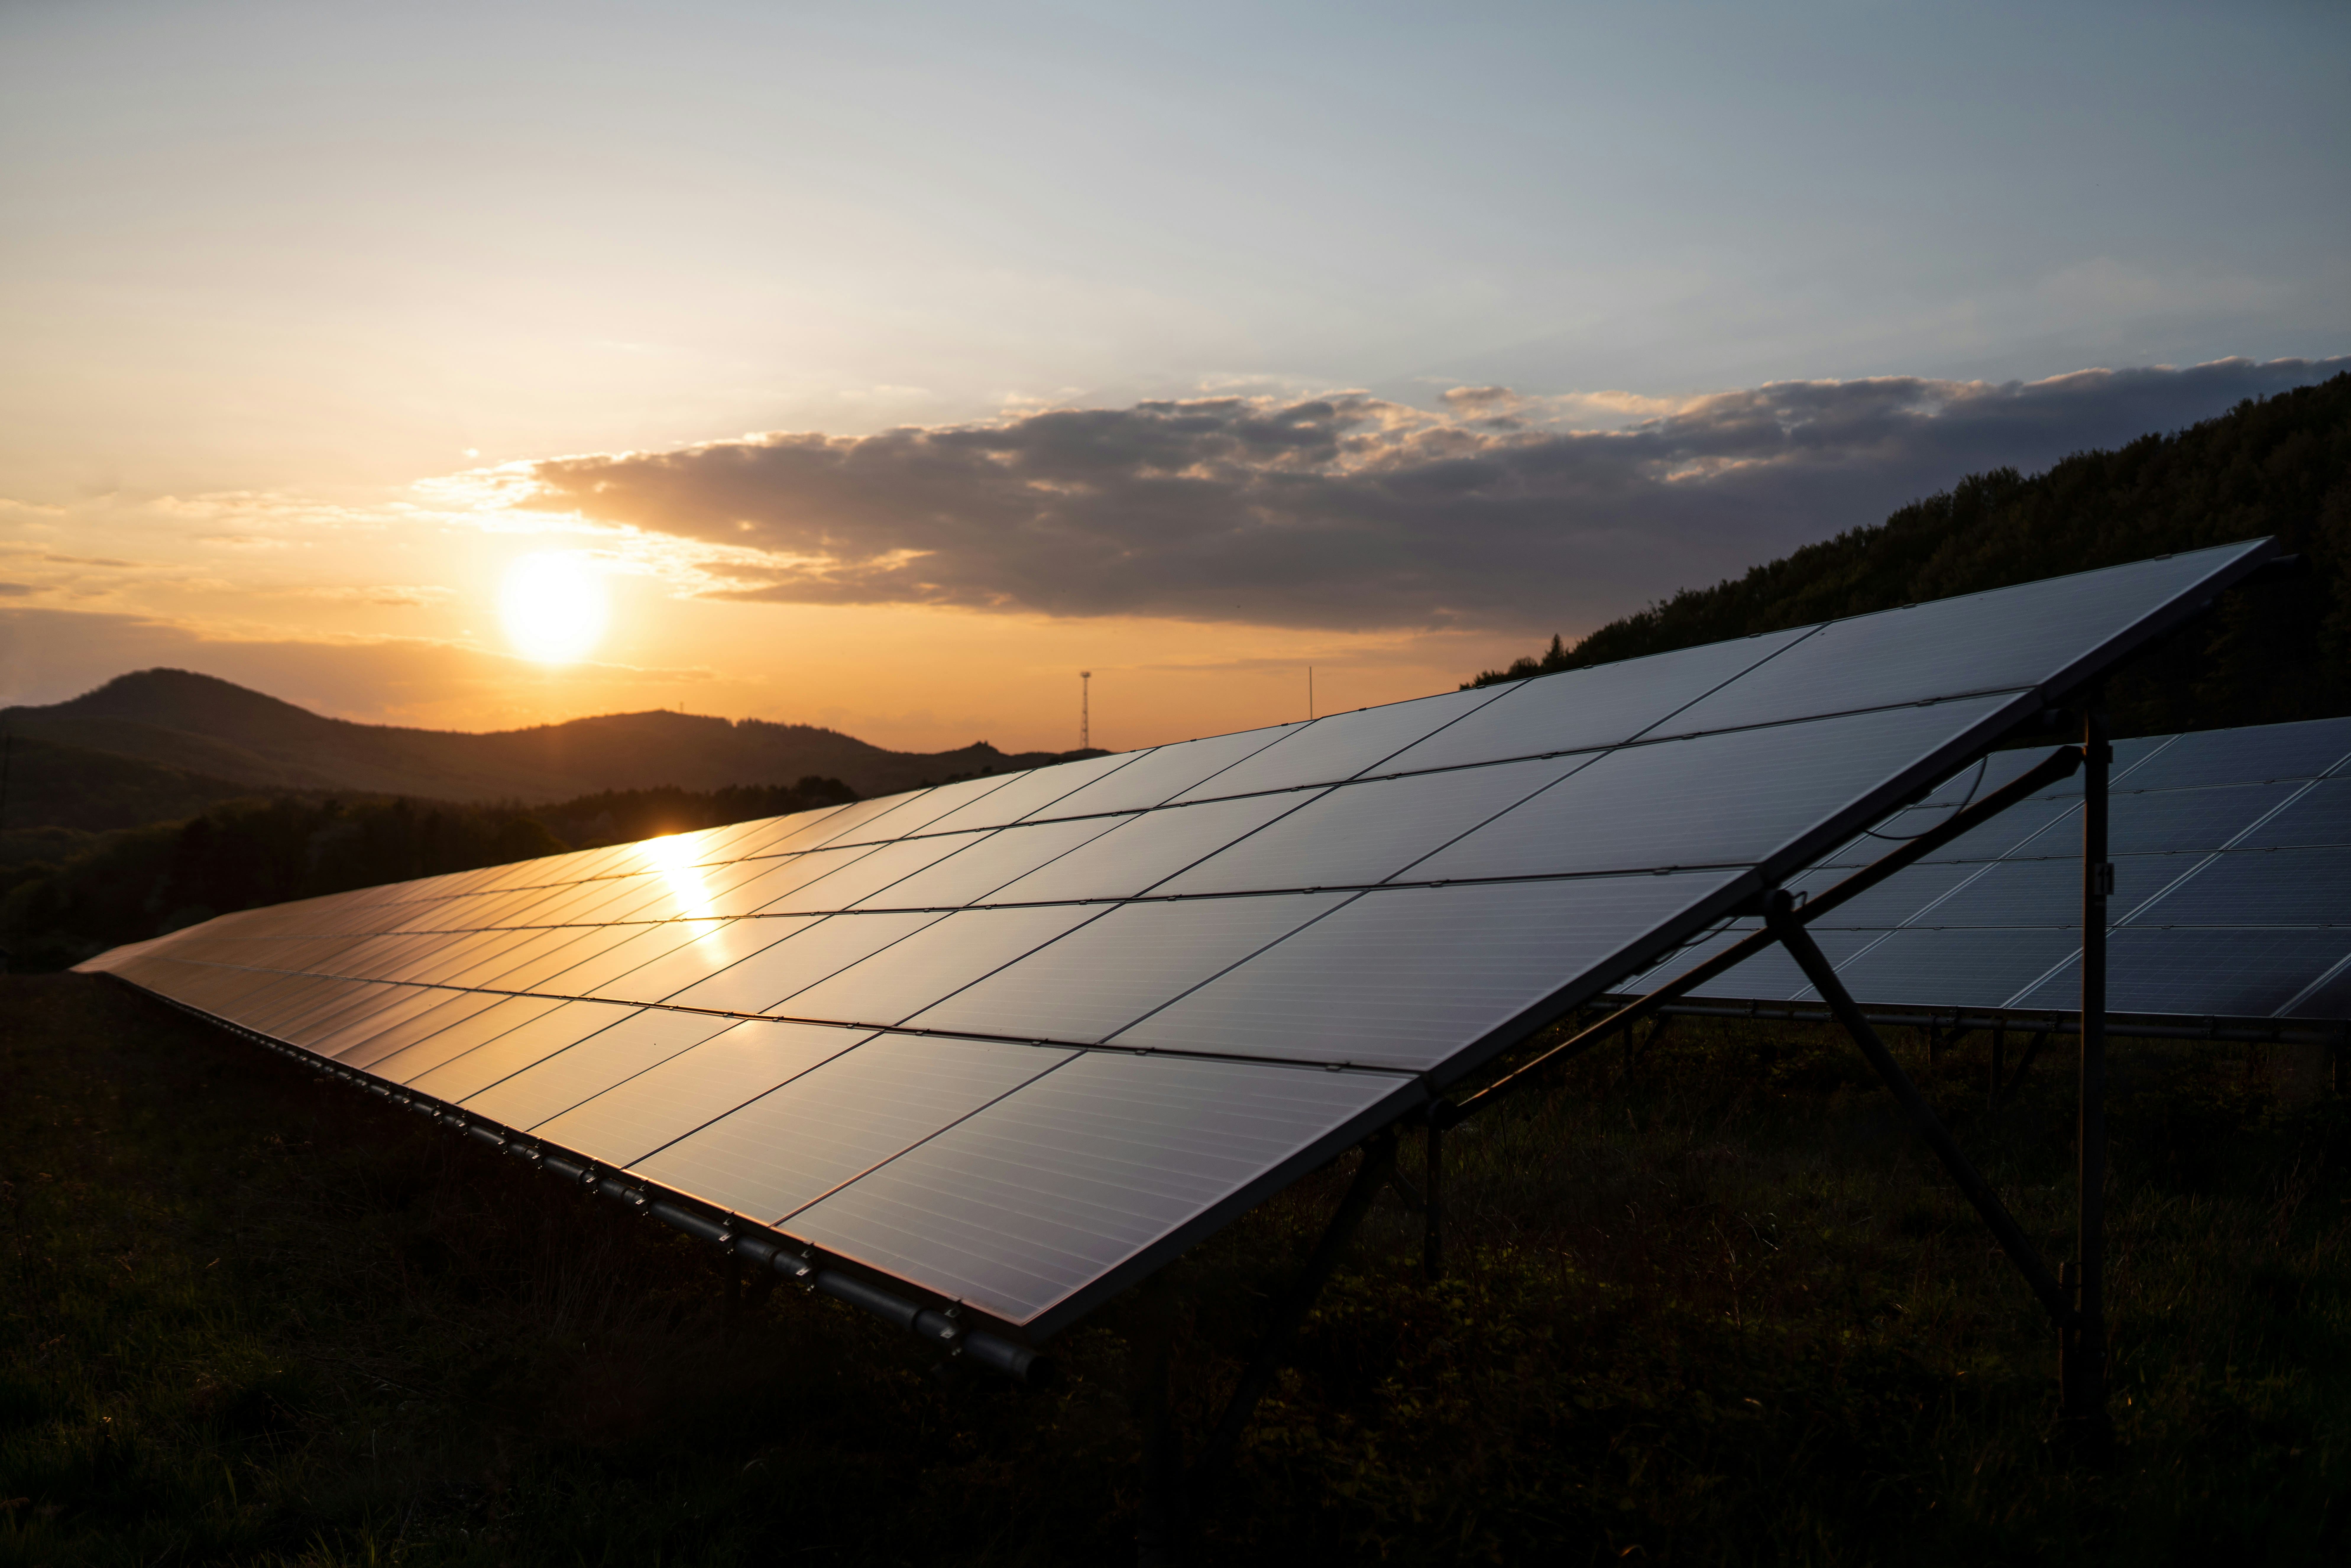 Solar panels in a rural setting with the sun setting behind hills, highlighting the potential for renewable energy systems supported by the REAP Grant.